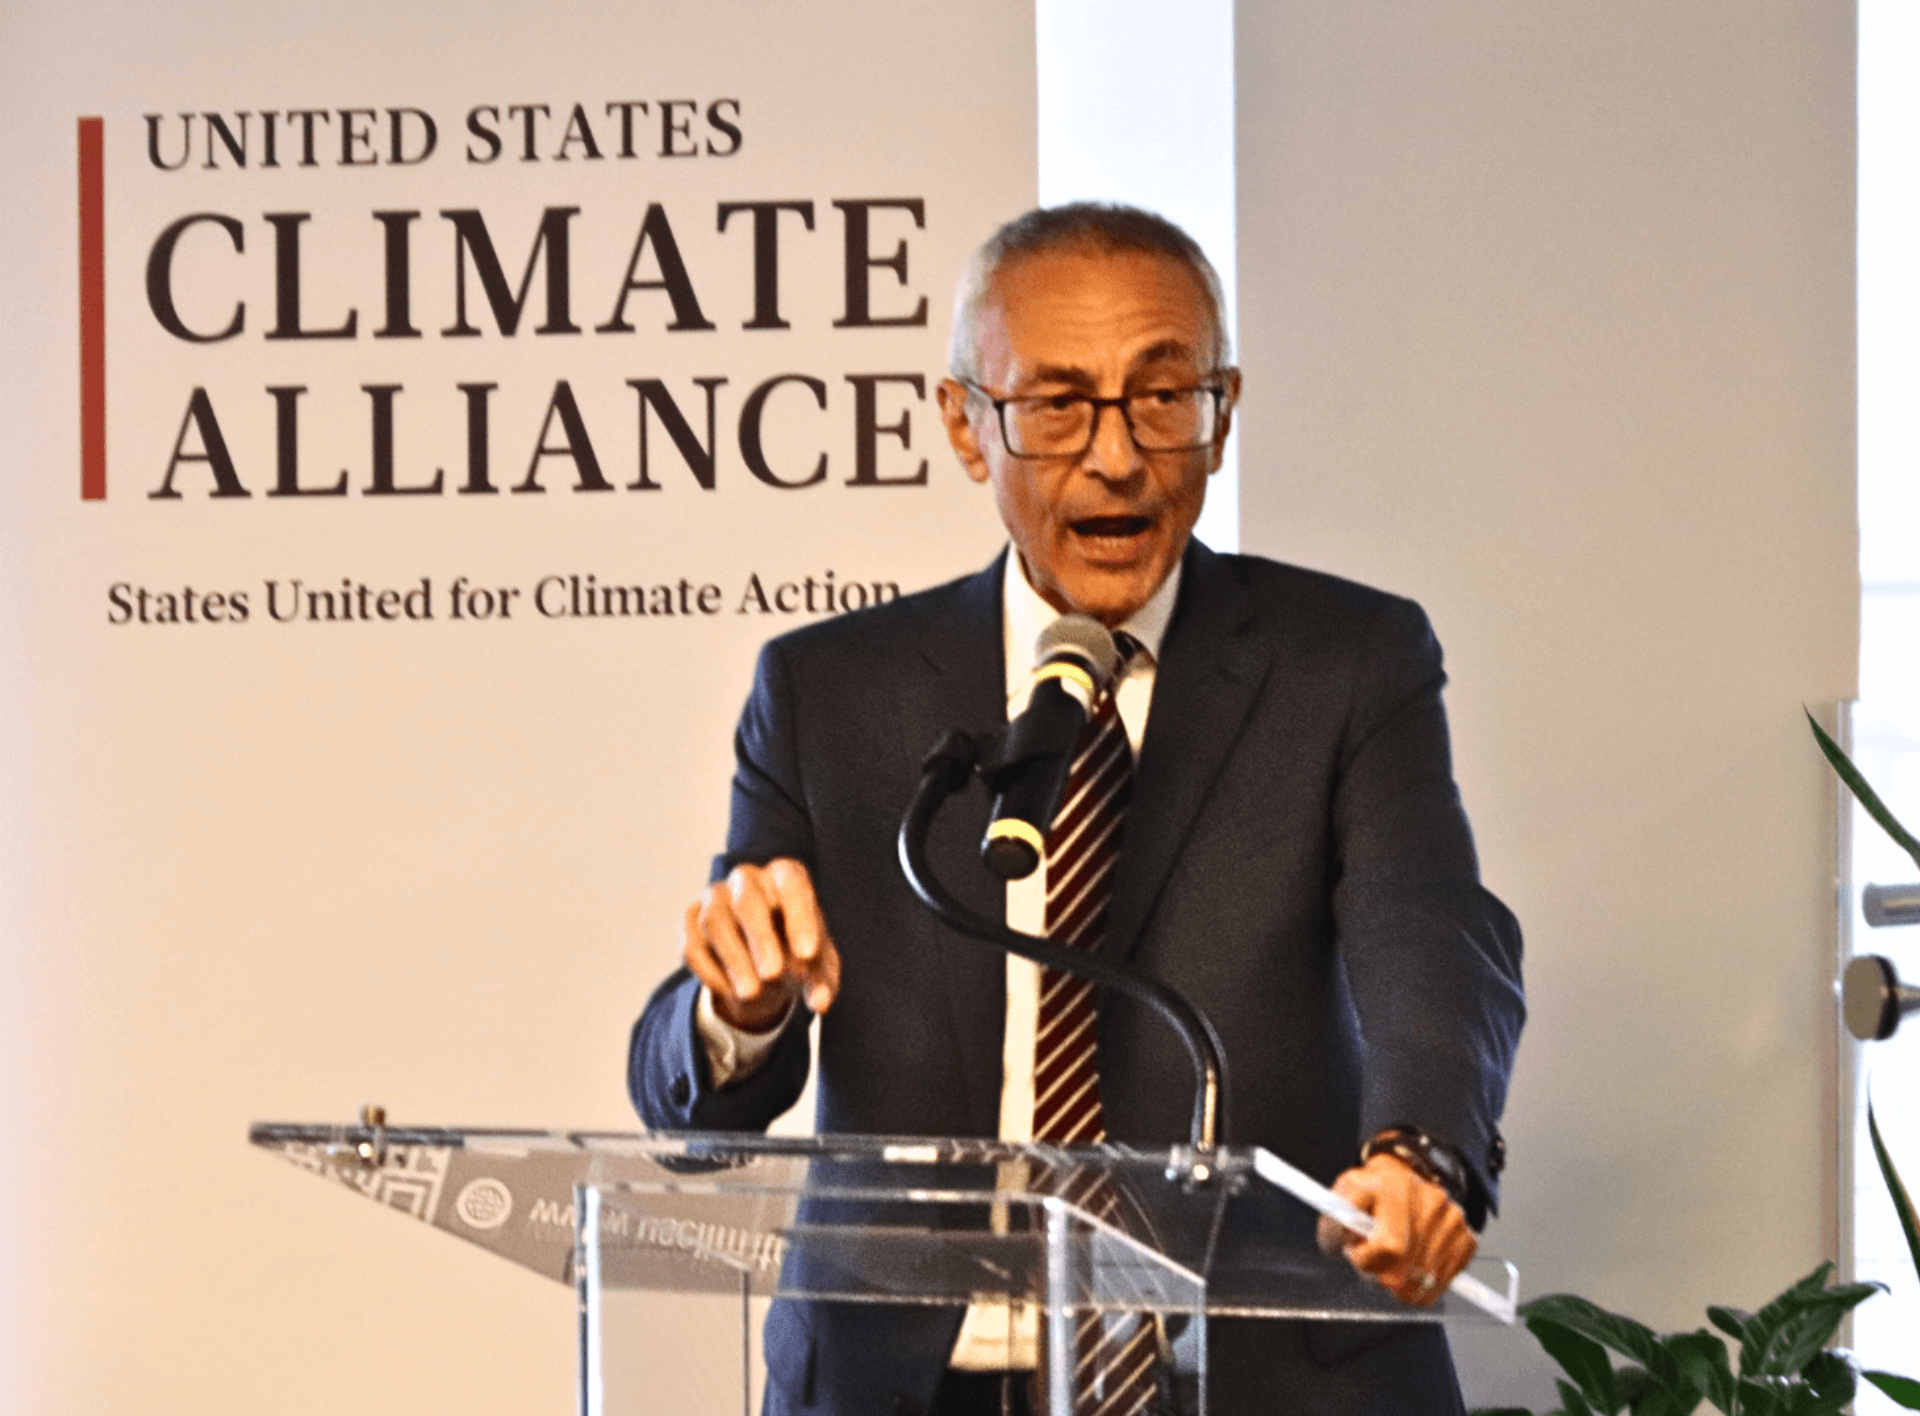 U.S. Climate Alliance Member Support | White House Senior Advisor John Podesta gives remarks during a reception hosted by the U.S. Climate Alliance.